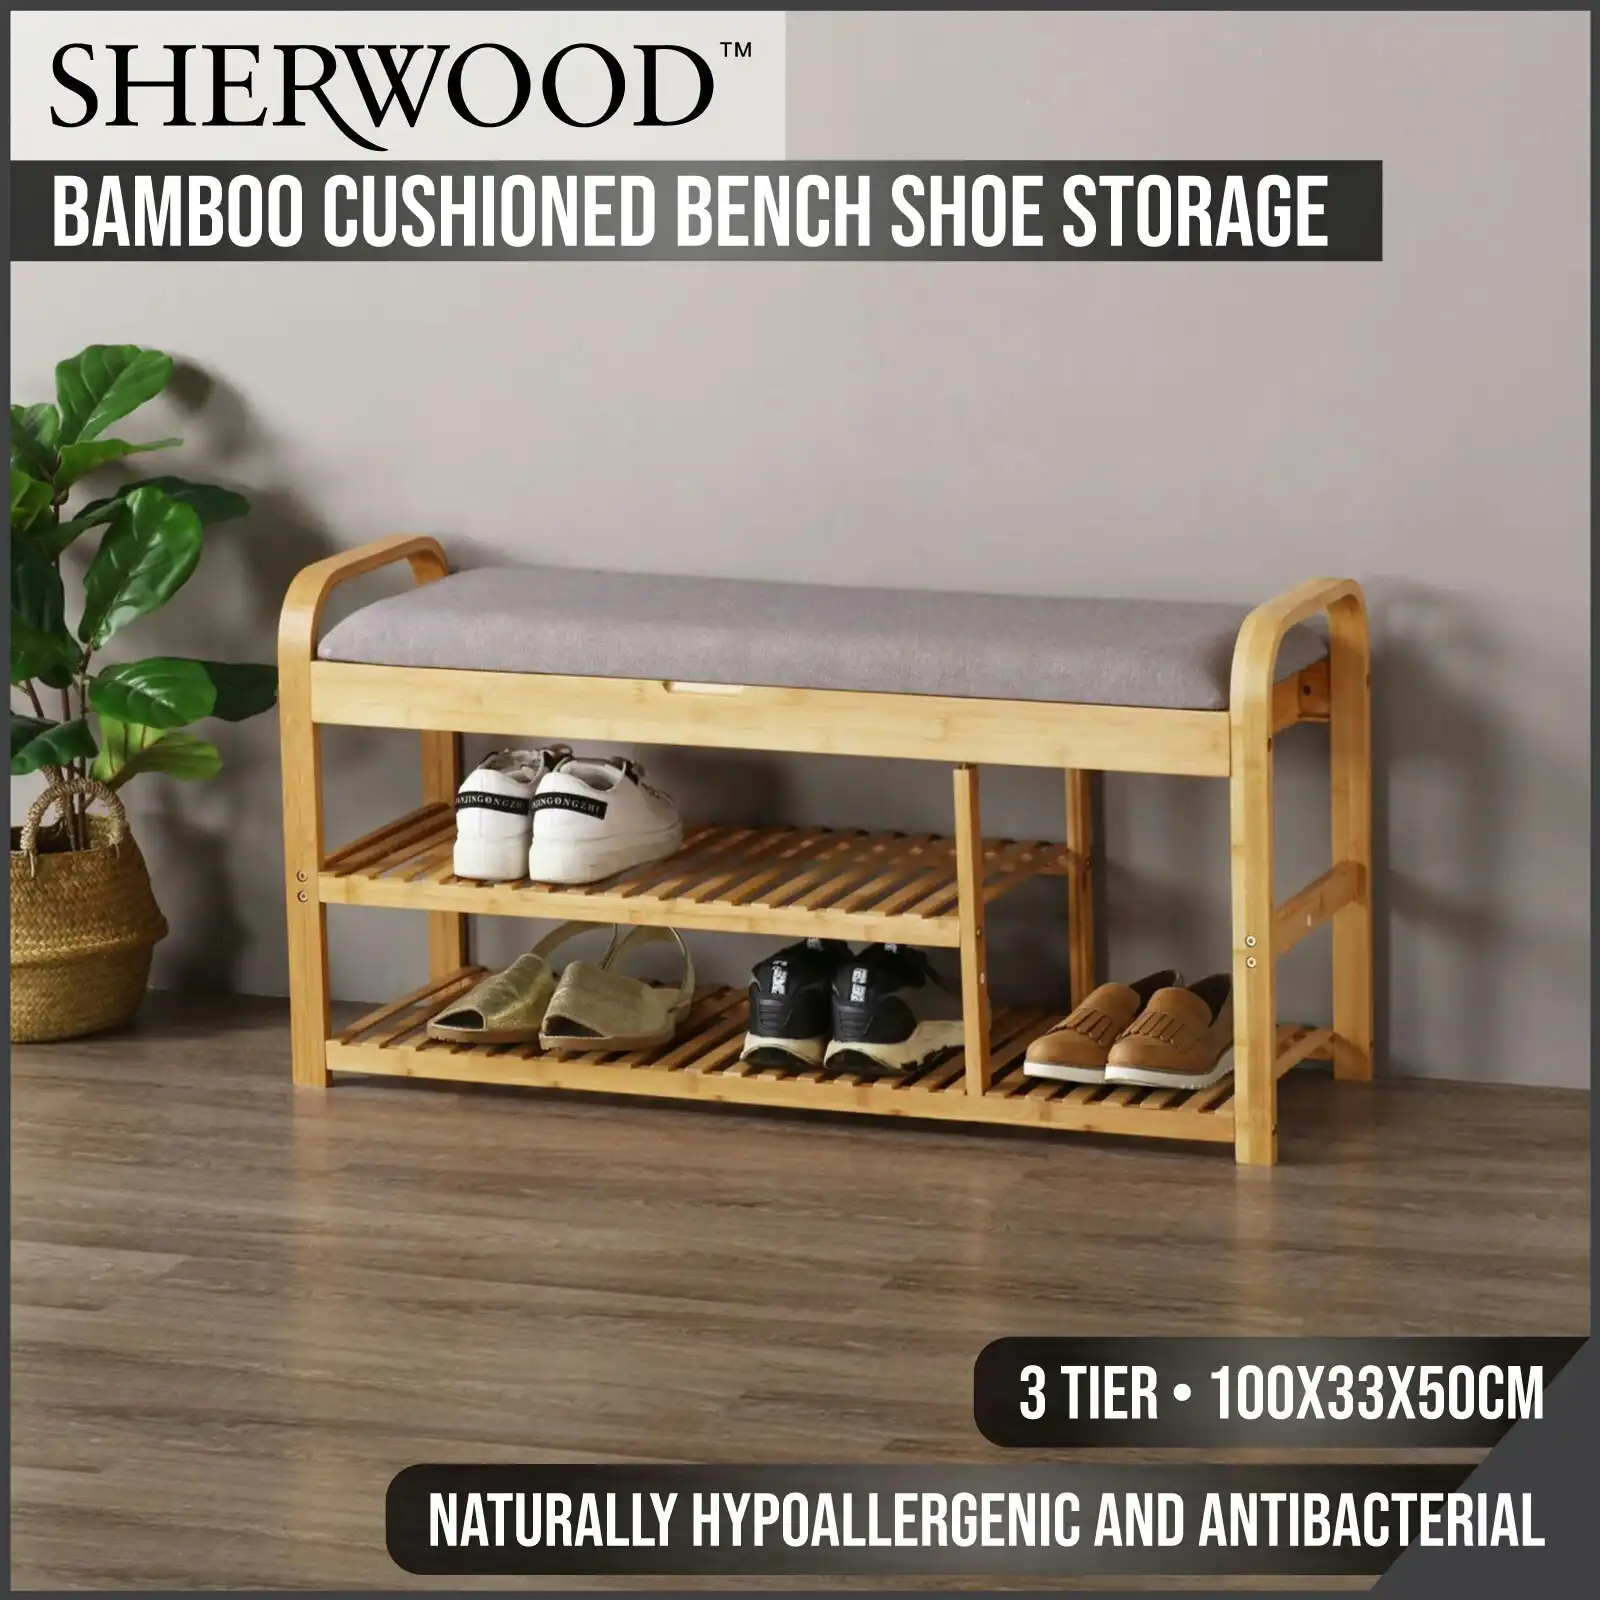 Sherwood Home Bamboo Cushioned Bench Shoe Storage 3 tier with Storage Compartment (TW Exclusive)